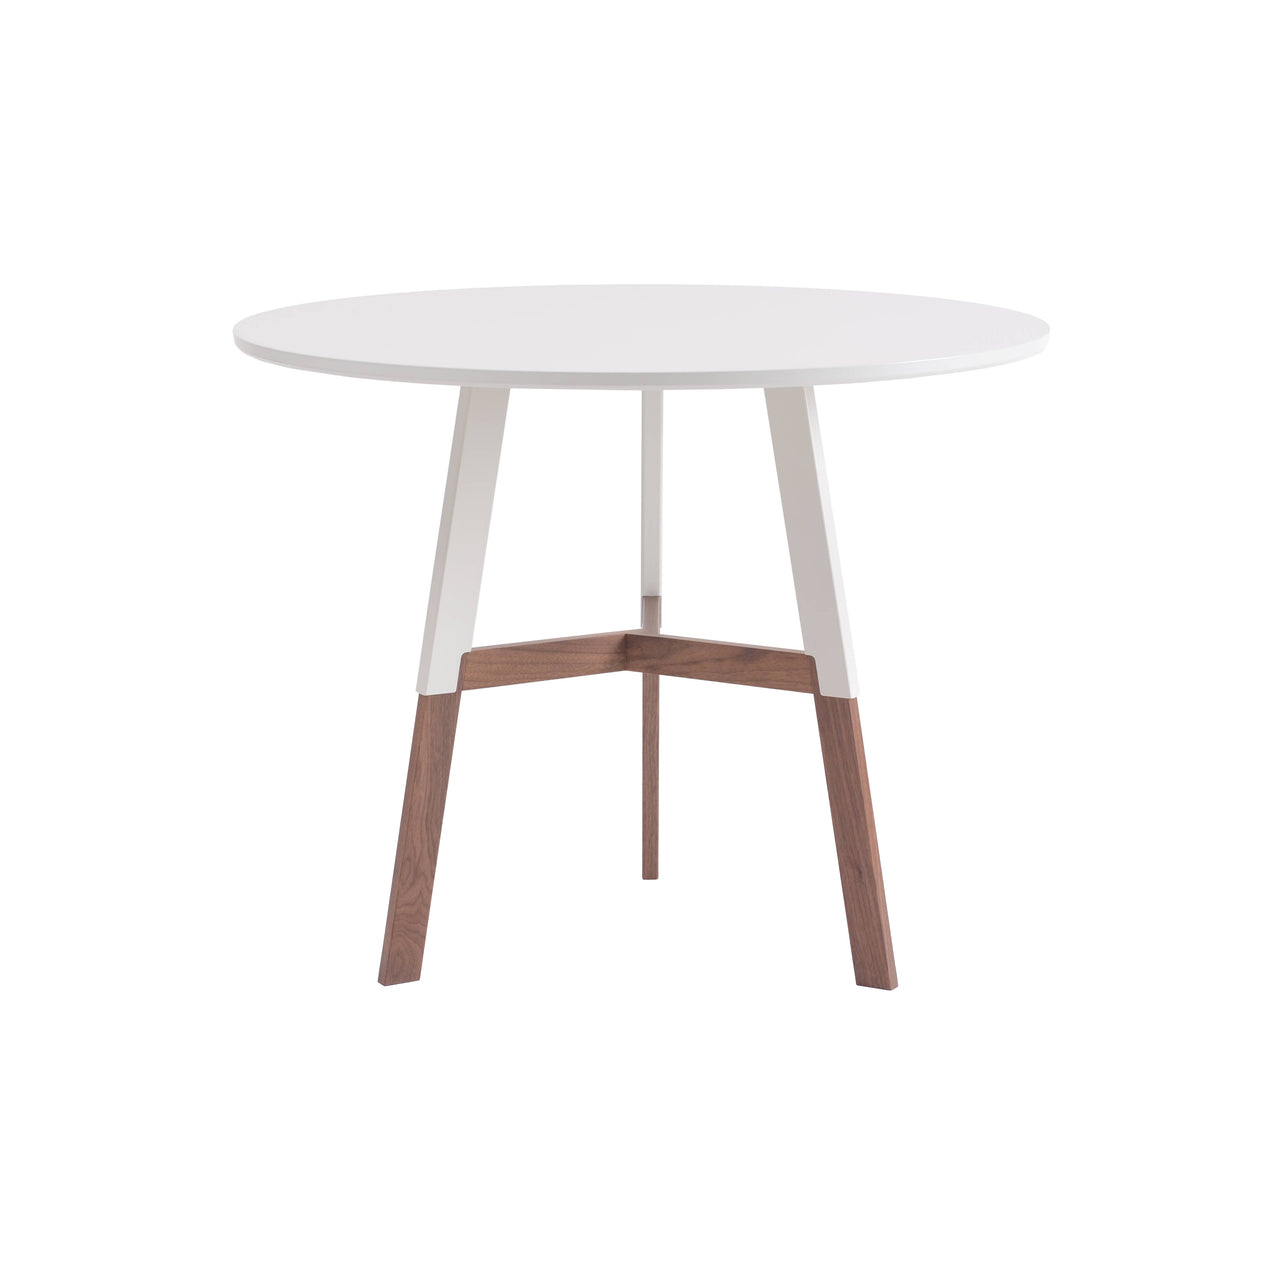 1/2 Nelson Cafe Table: Walnut + White